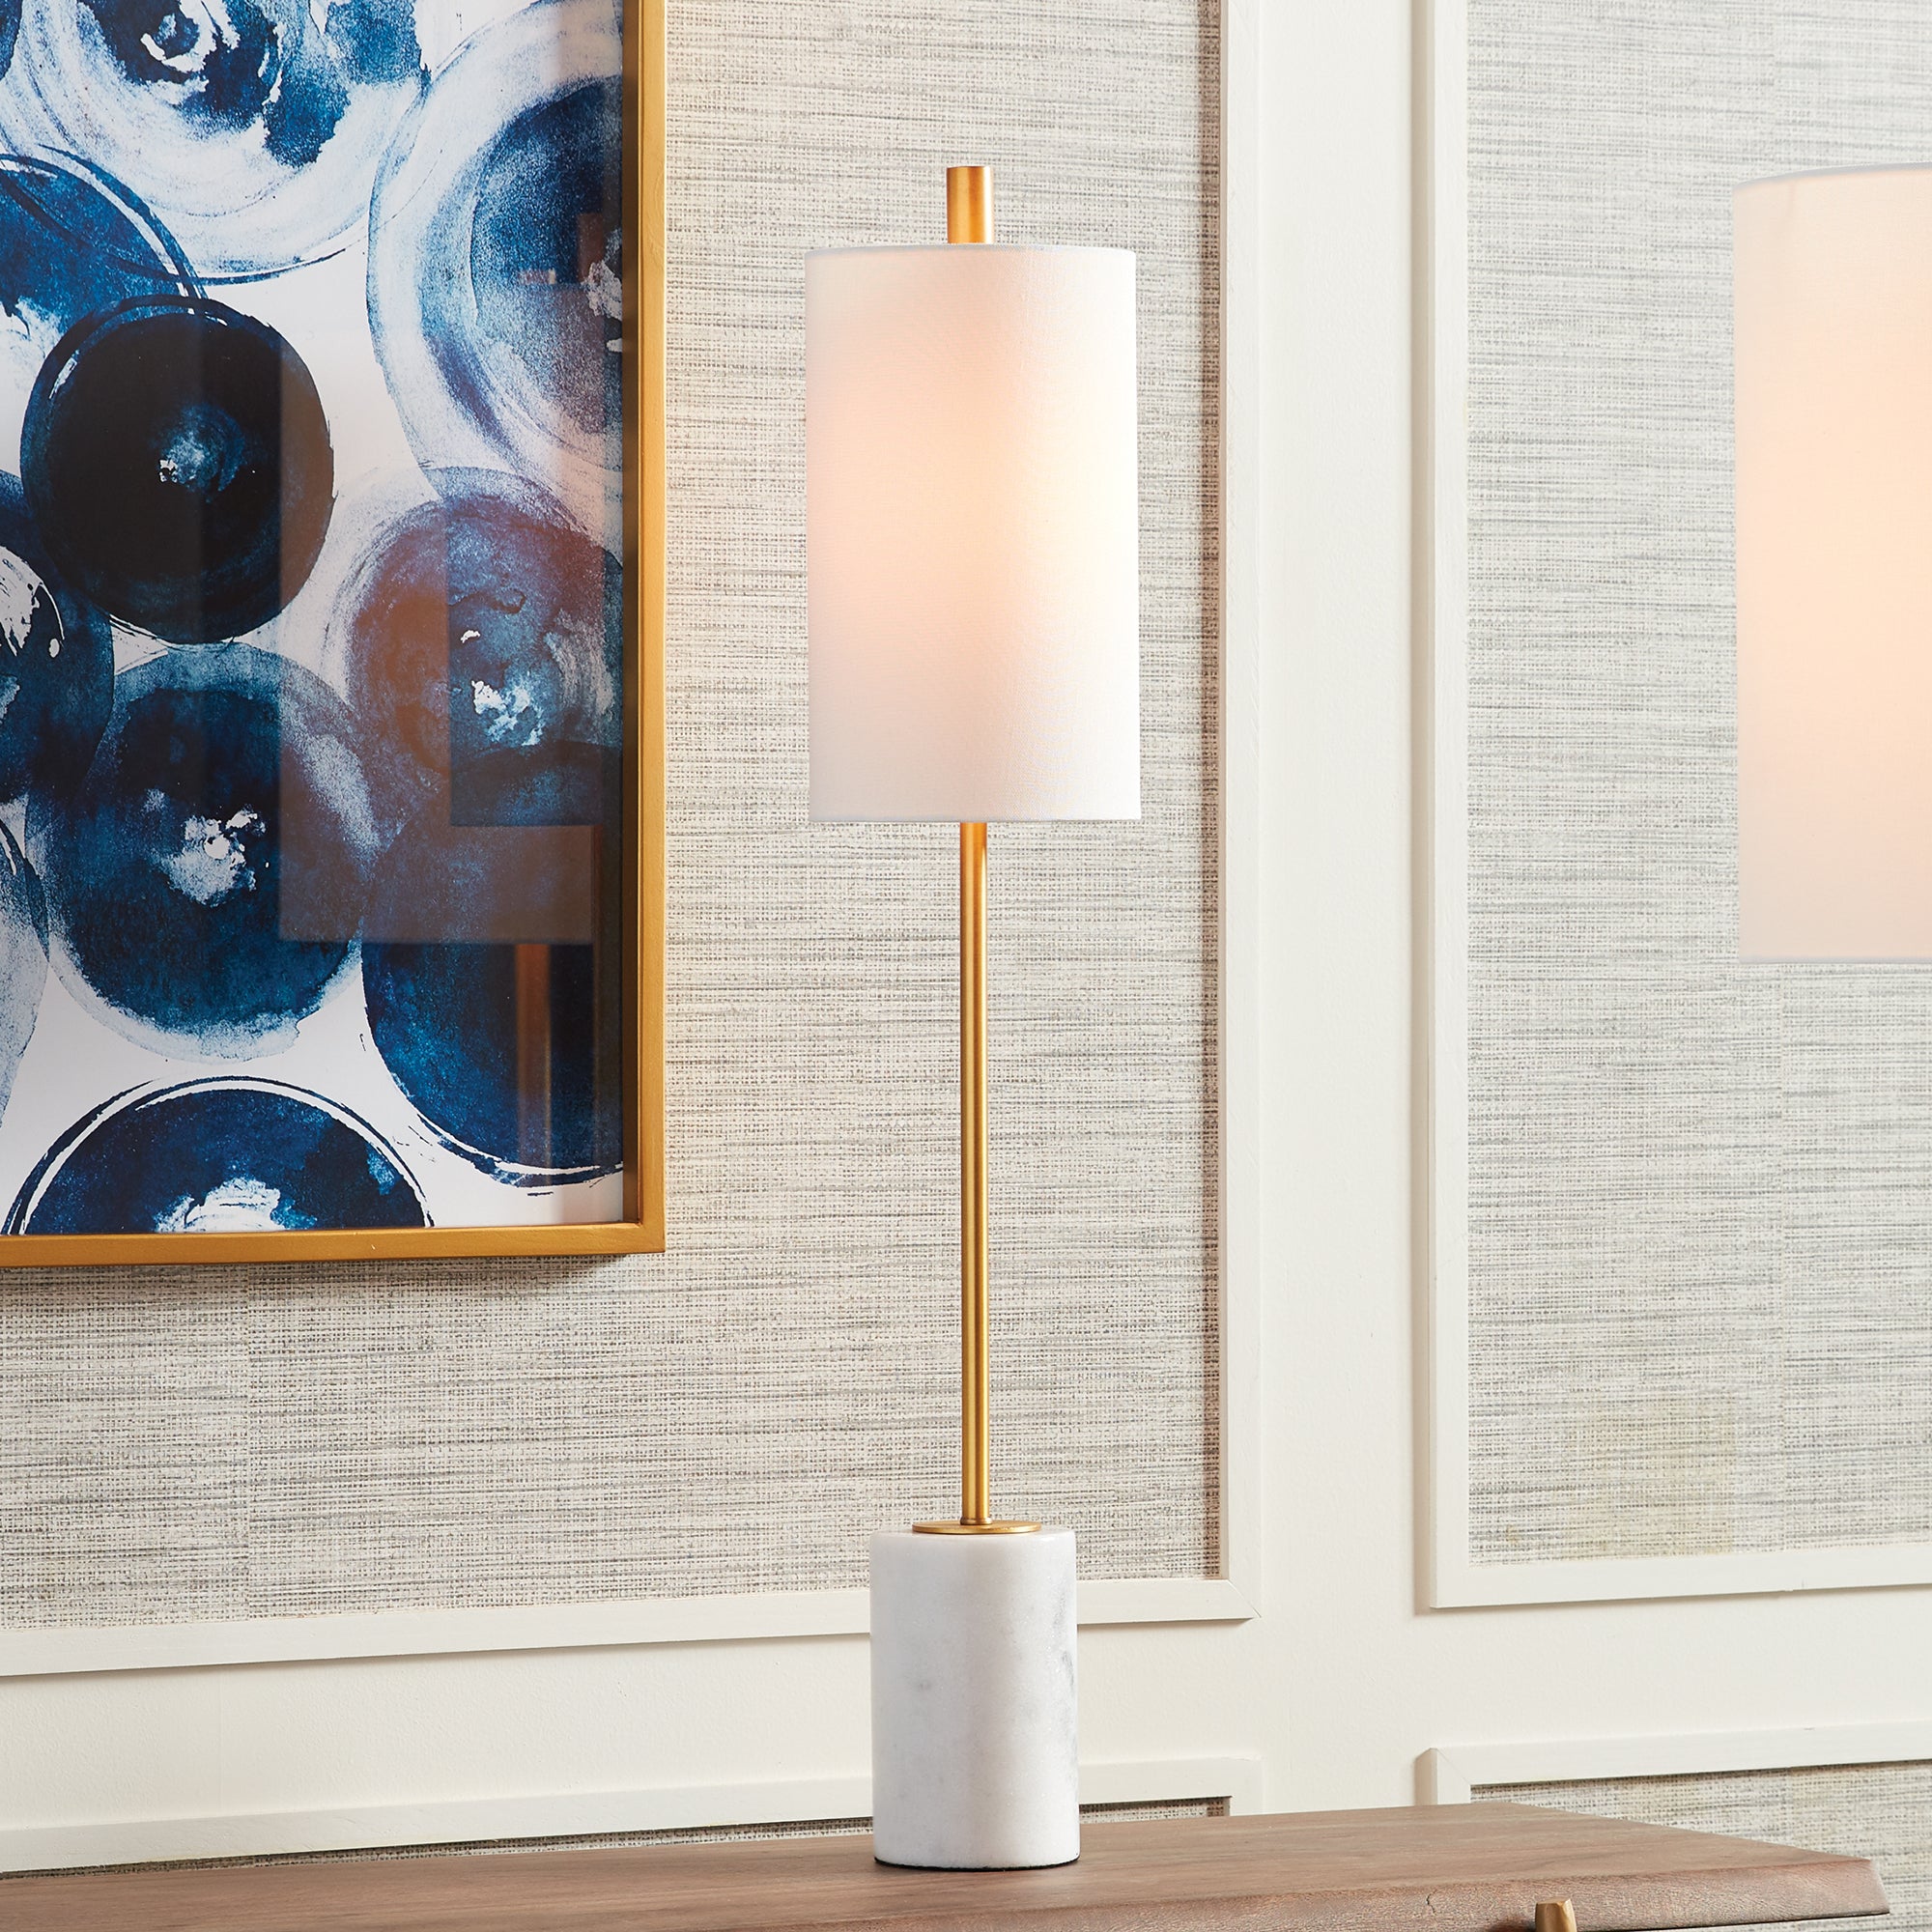 An unexpected mix of marble and brass accents make this lamp a stand out piece. The tall, narrow base and tailored shade are well-designed details not to be missed. Amethyst Home provides interior design, new construction, custom furniture, and area rugs in the Seattle metro area.